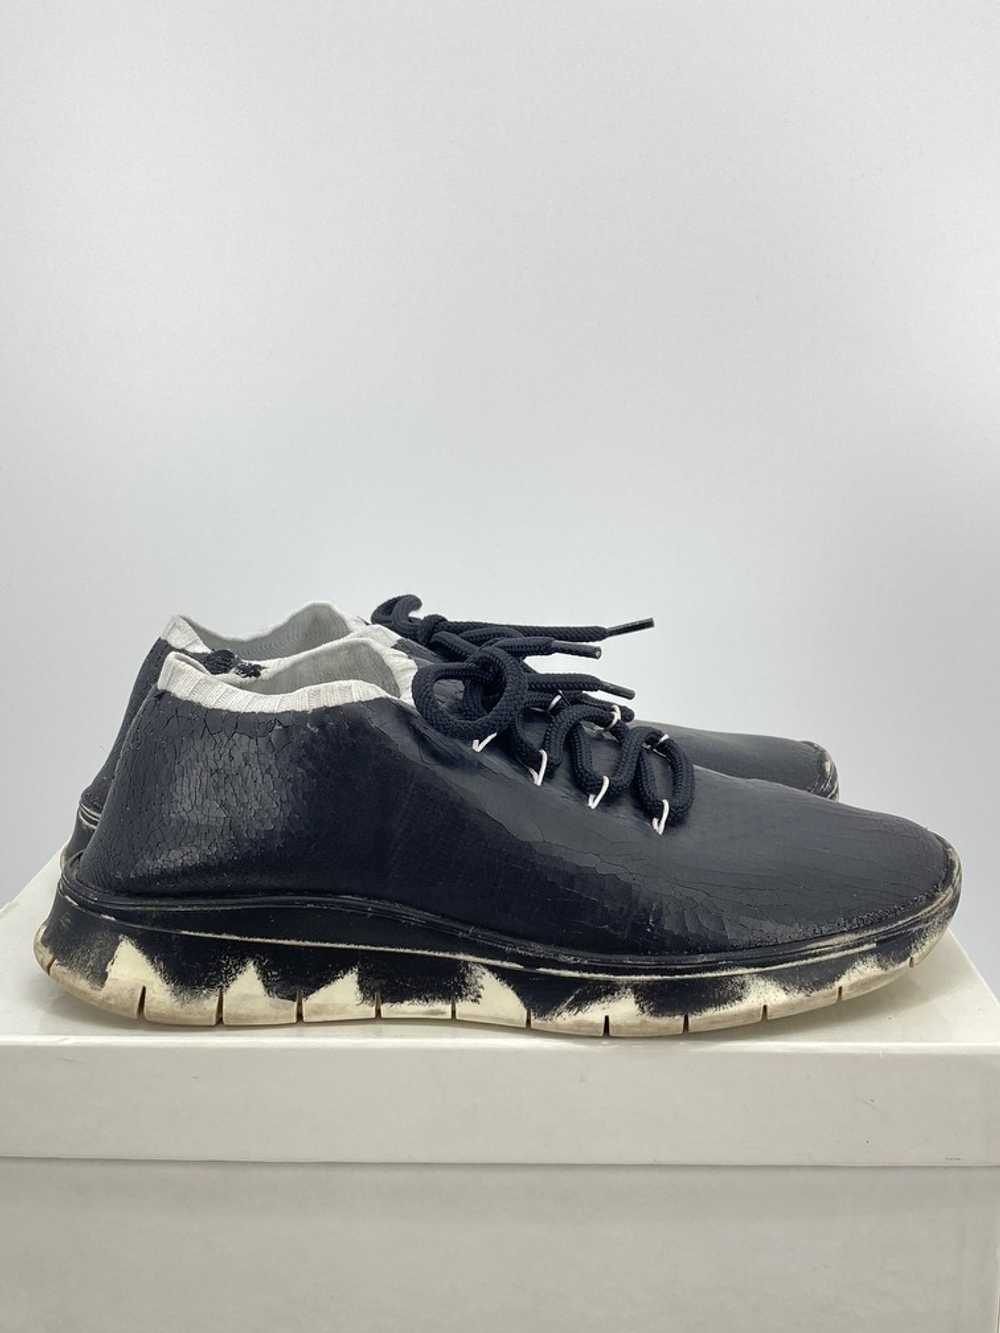 Maison Margiela Hand Painted Flyknit Runners - image 5